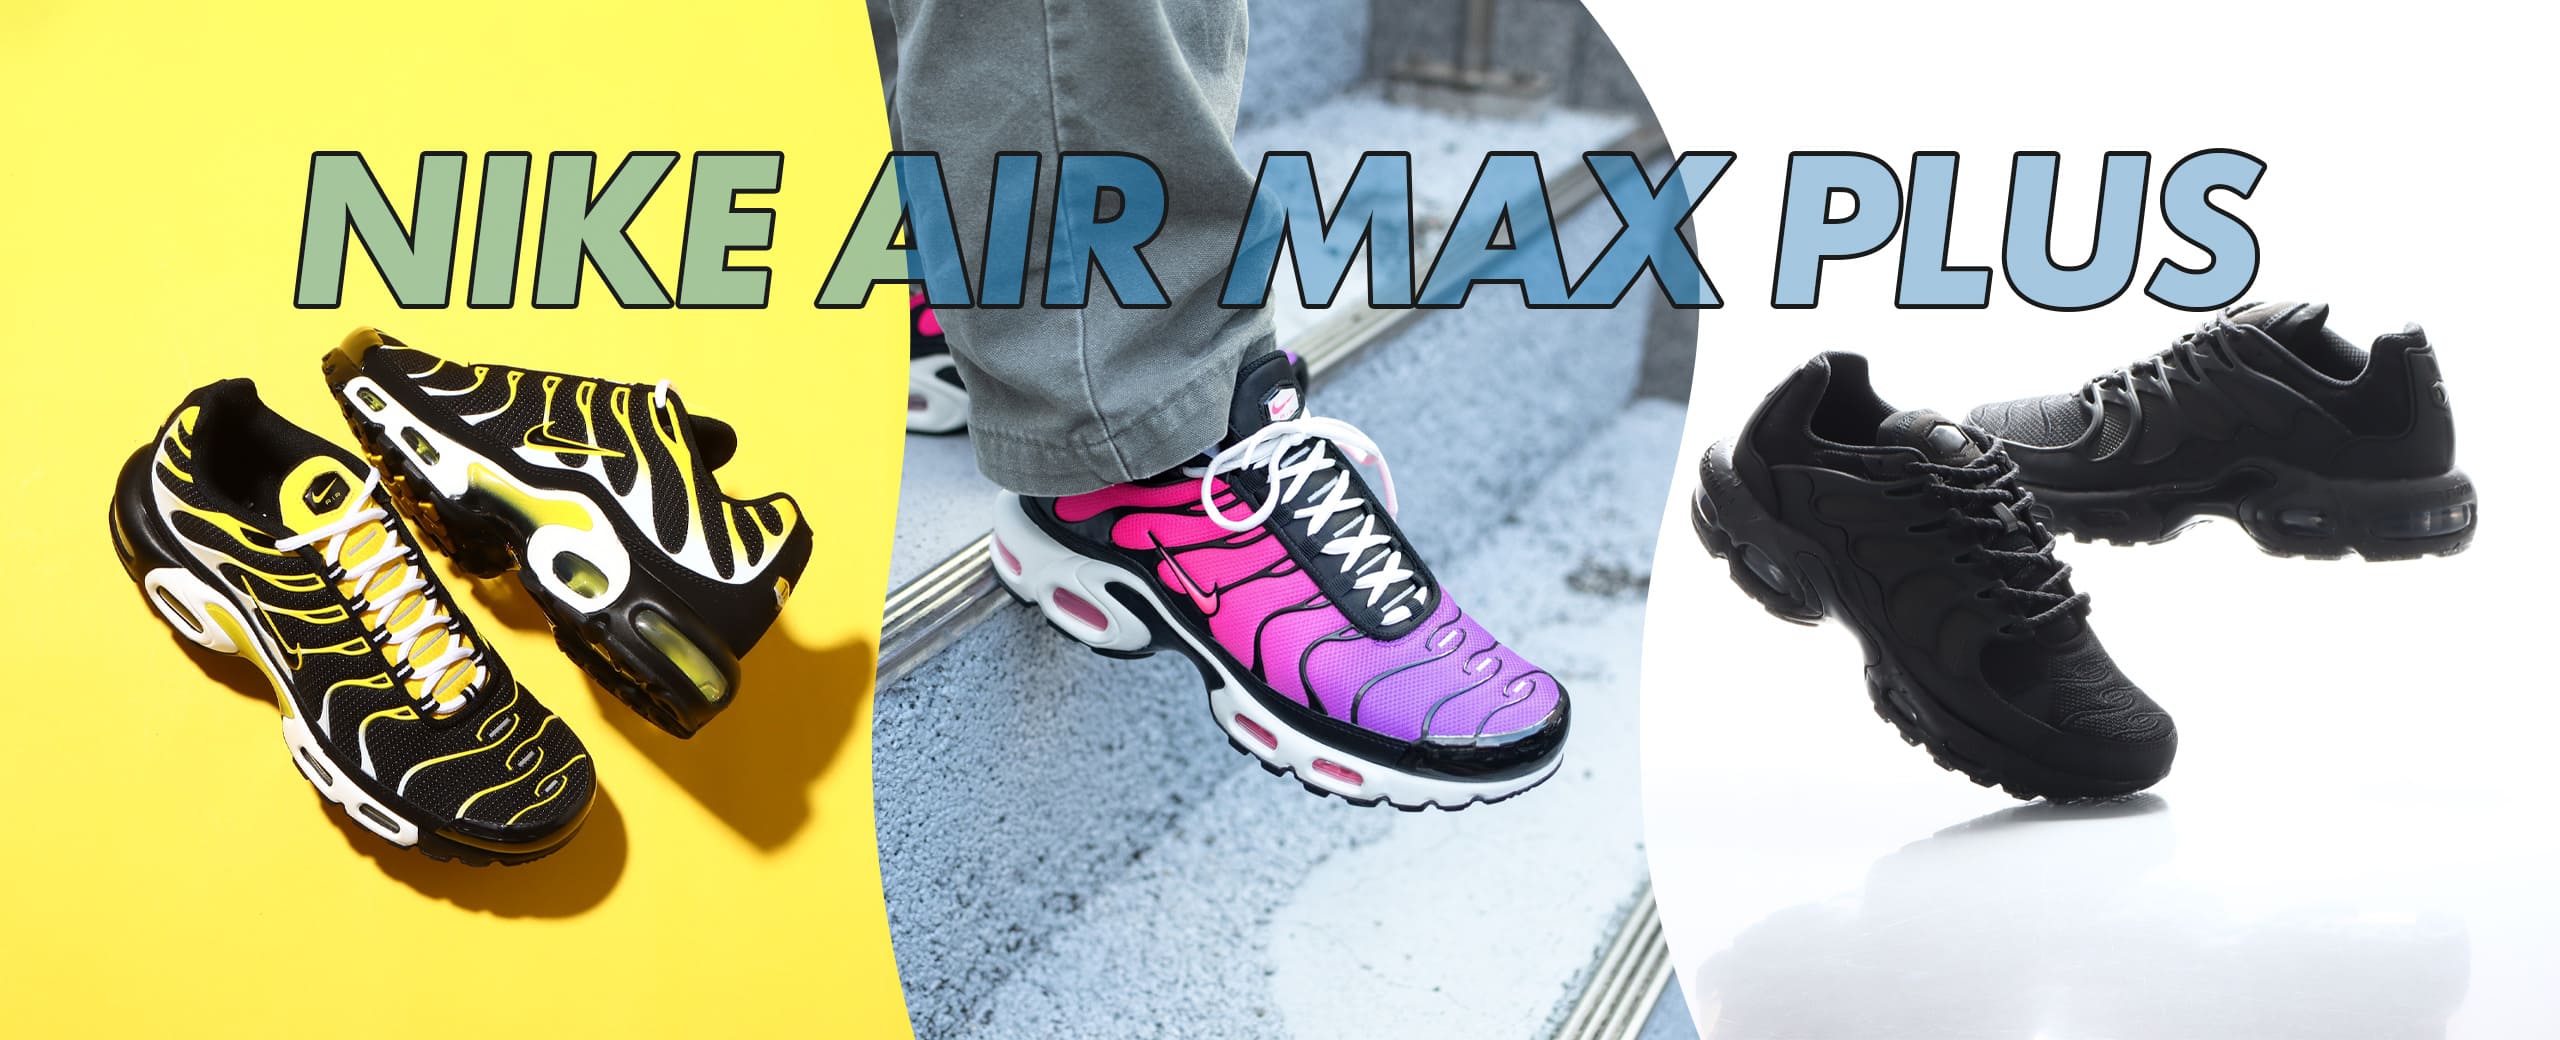 "NIKE AIR MAX PLUS NEW COLLECTION"